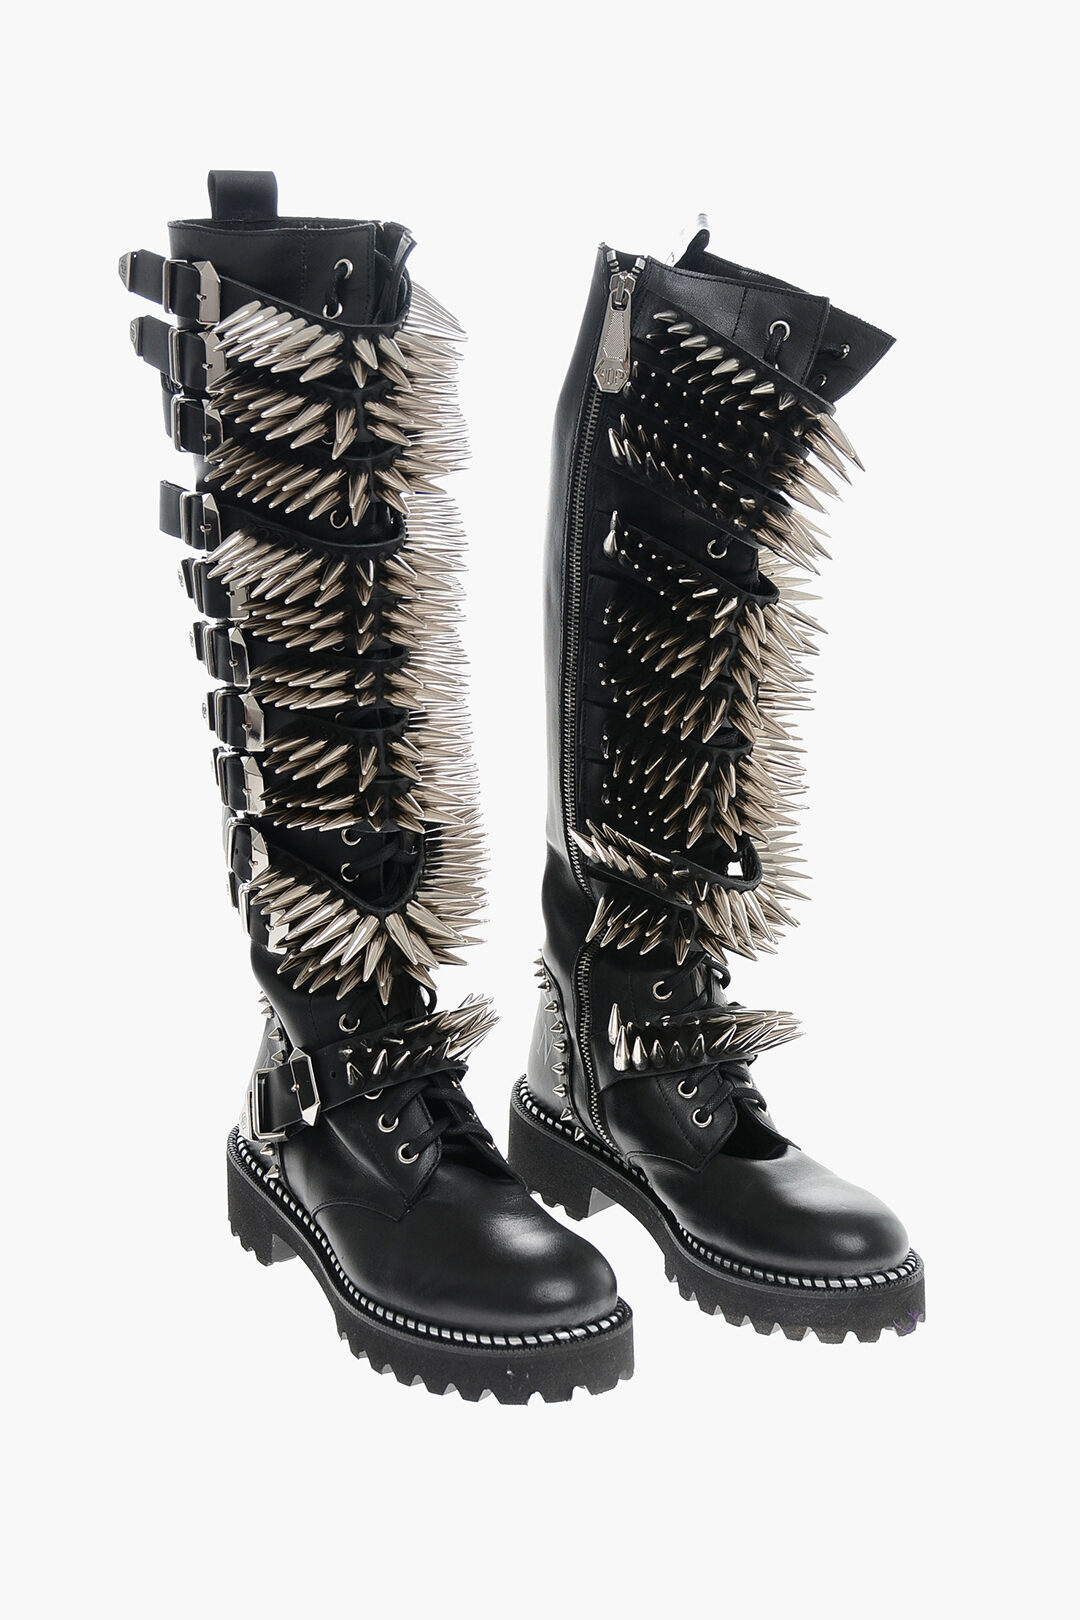 PHILIPP PLEIN フィリッププレイン ブーツ WSE0289 PLE075N 02 NERO OPACO レディース LEATHER LACE-UP BOOTS WITH ALL-OVER STUDS 4.5CM 【関税・送料無料】【ラッピング無料】 dk